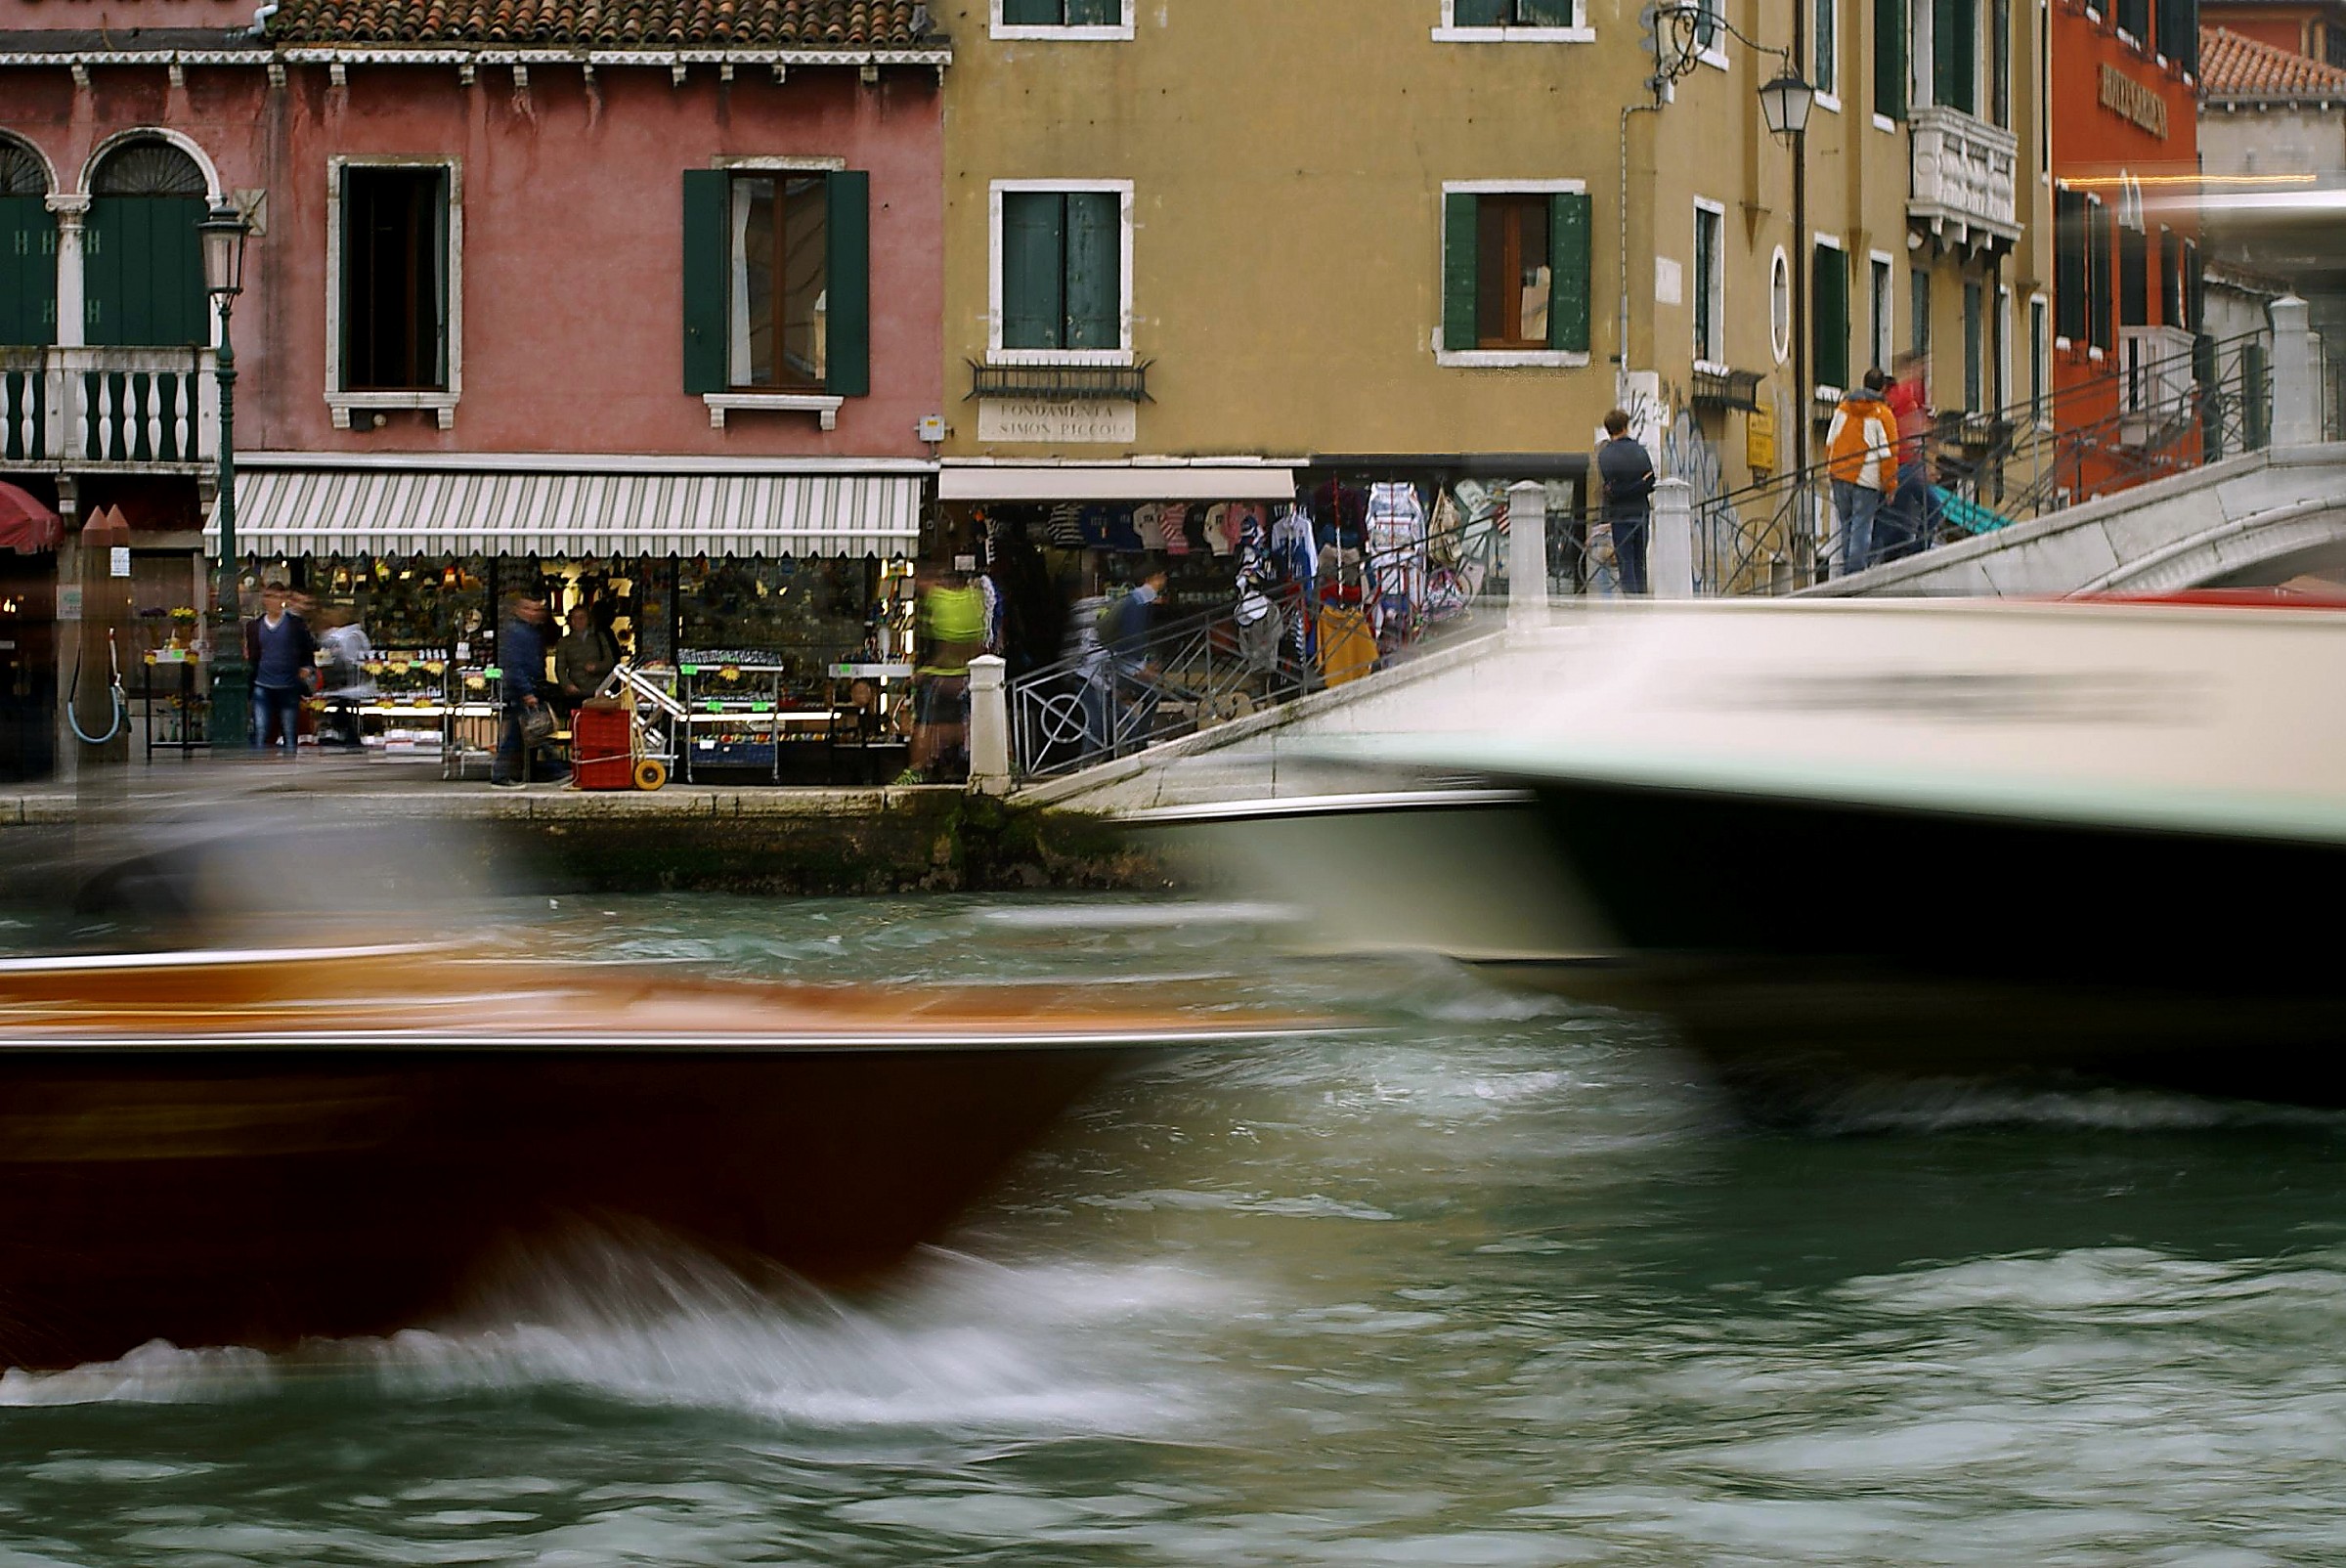 Movement on the Grand Canal...